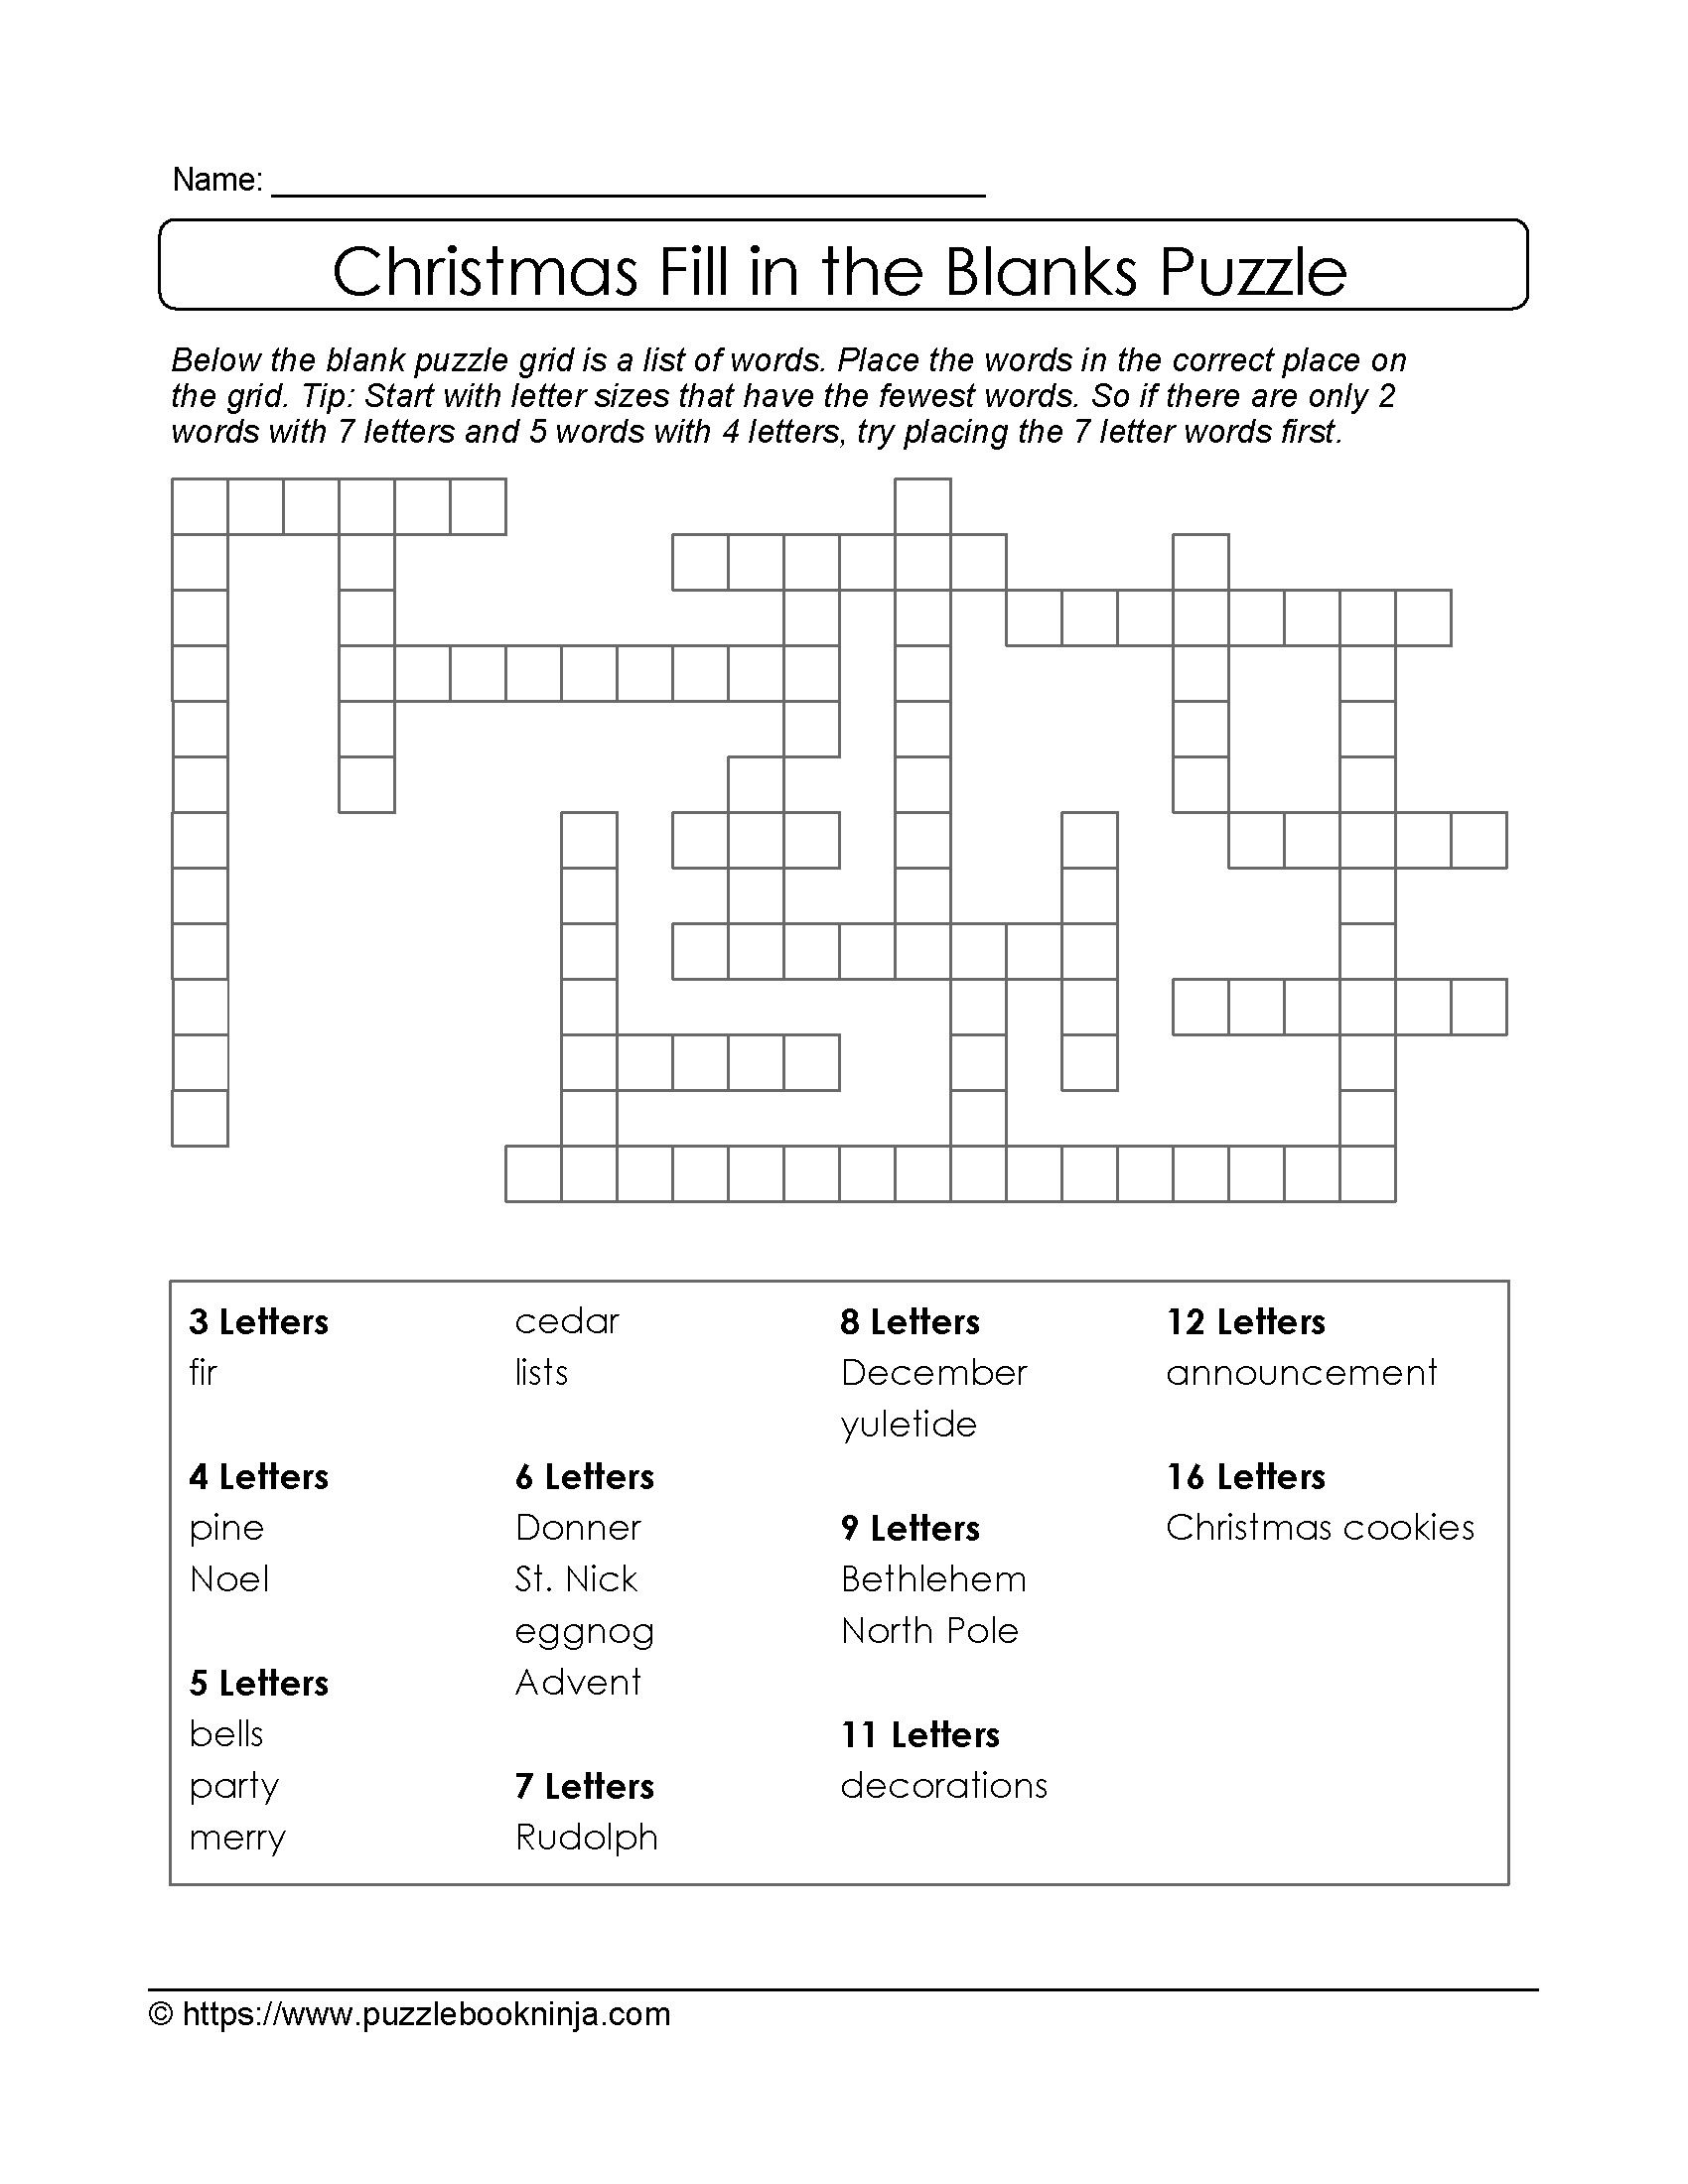 Christmas Printable Puzzle. Free Fill In The Blanks. | Christmas - Printable Blank Crossword Puzzles